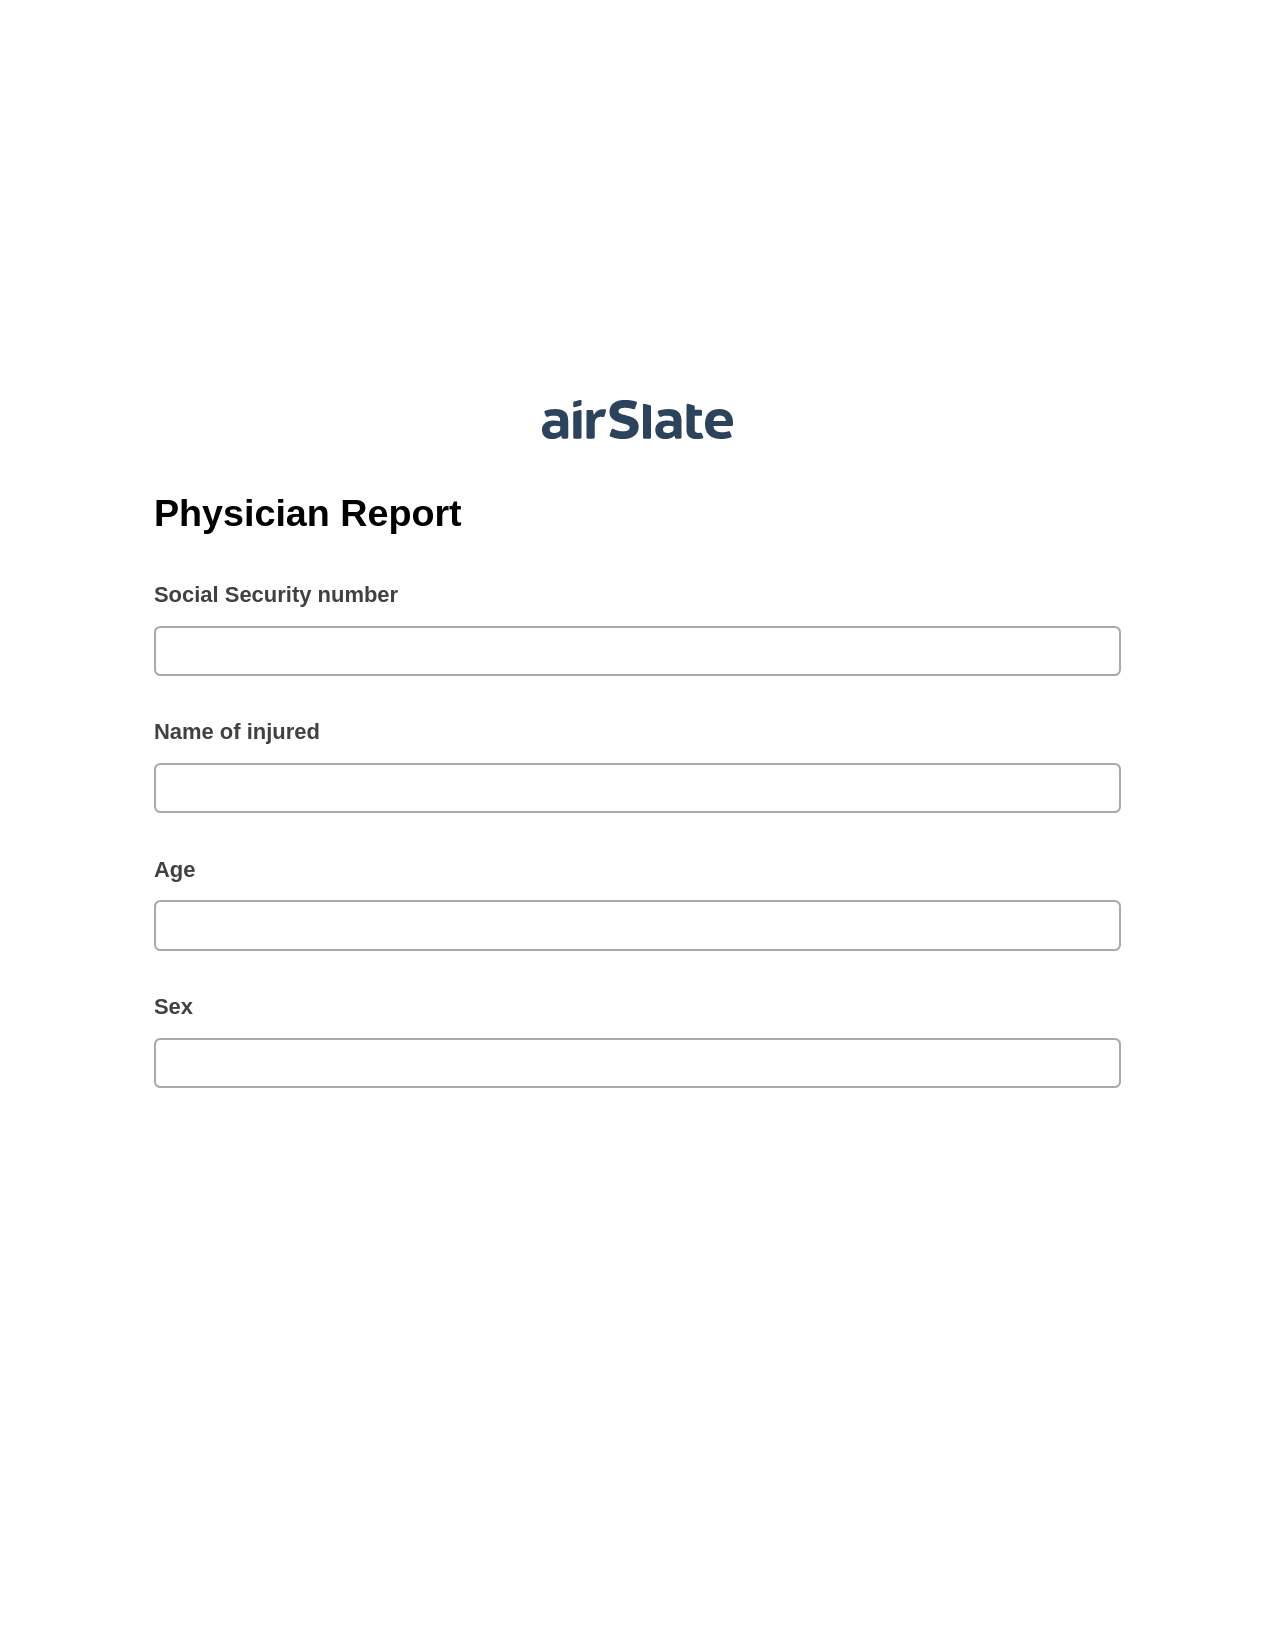 Physician Report Pre-fill from Office 365 Excel Bot, Update NetSuite Record Bot, Archive to SharePoint Folder Bot